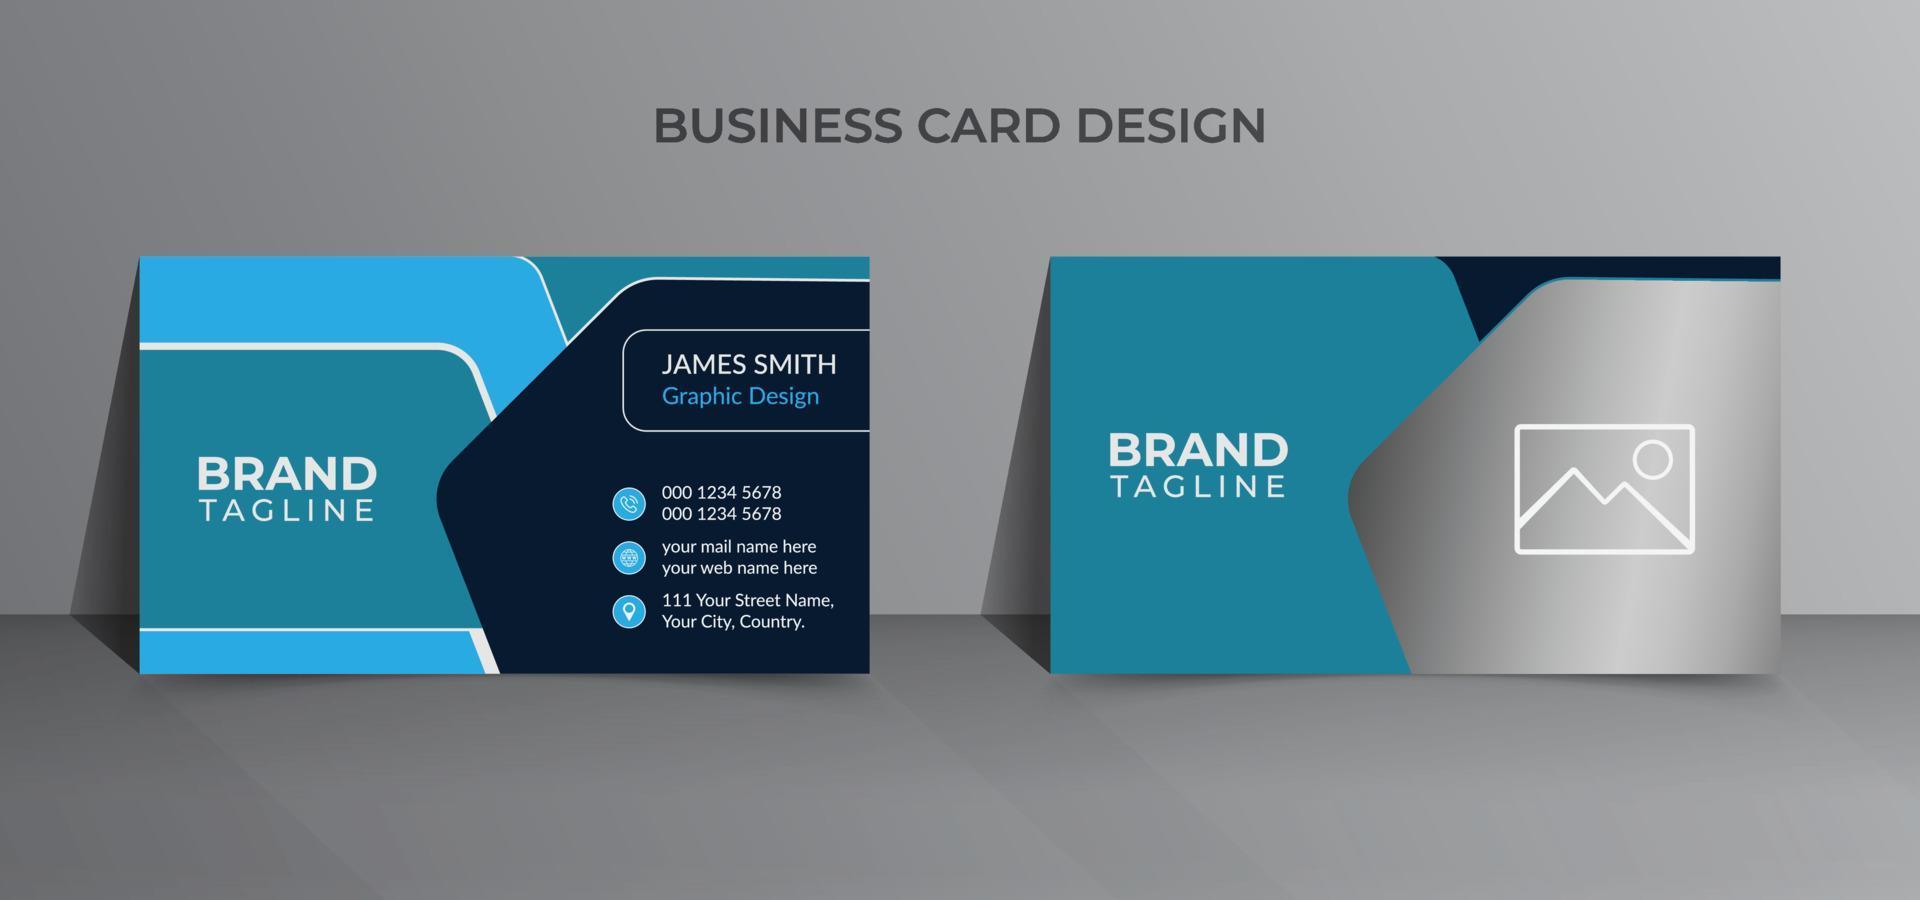 Business card template design in vector eps